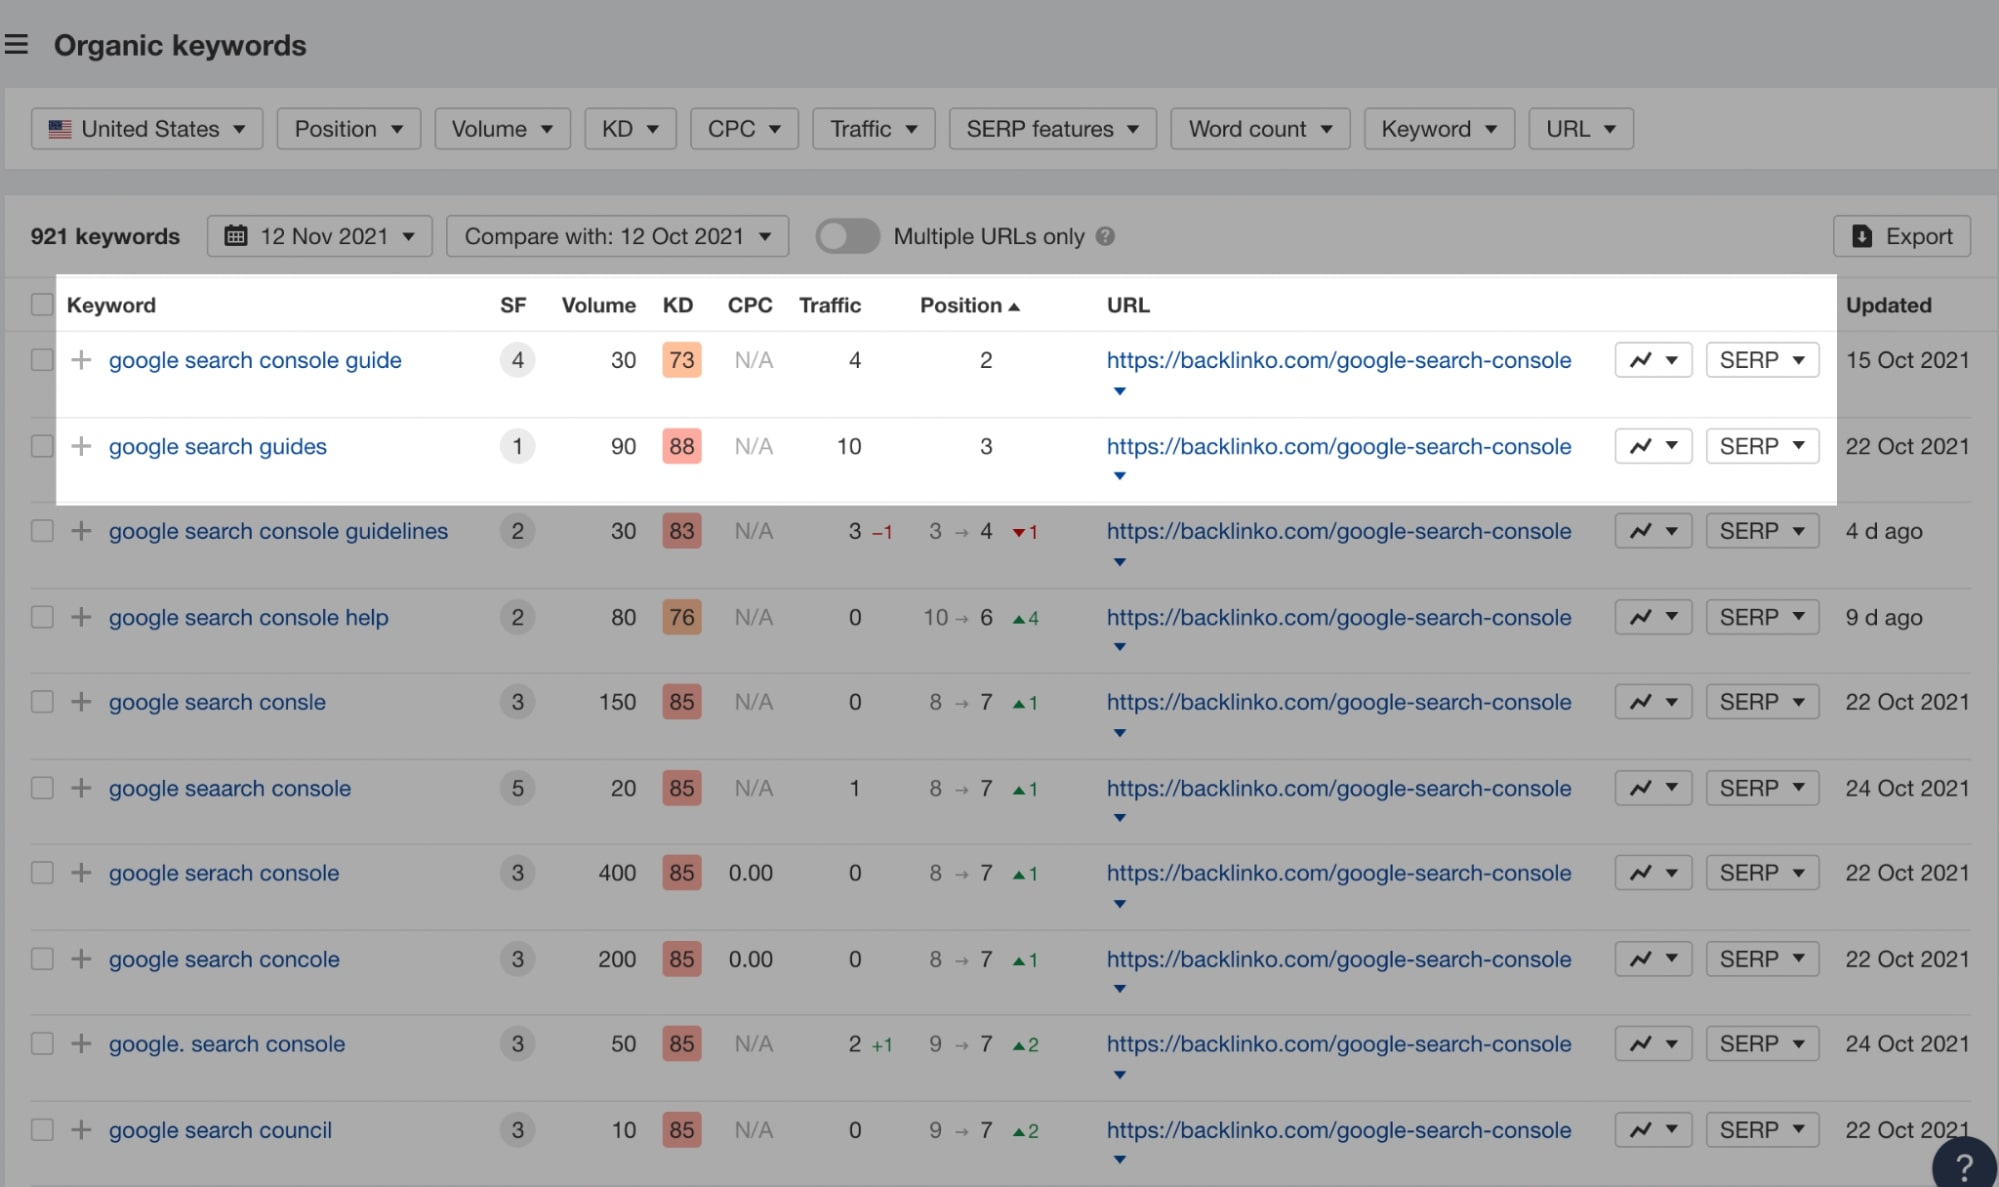 Keyword Backlinko's post about Google search console is ranking for.